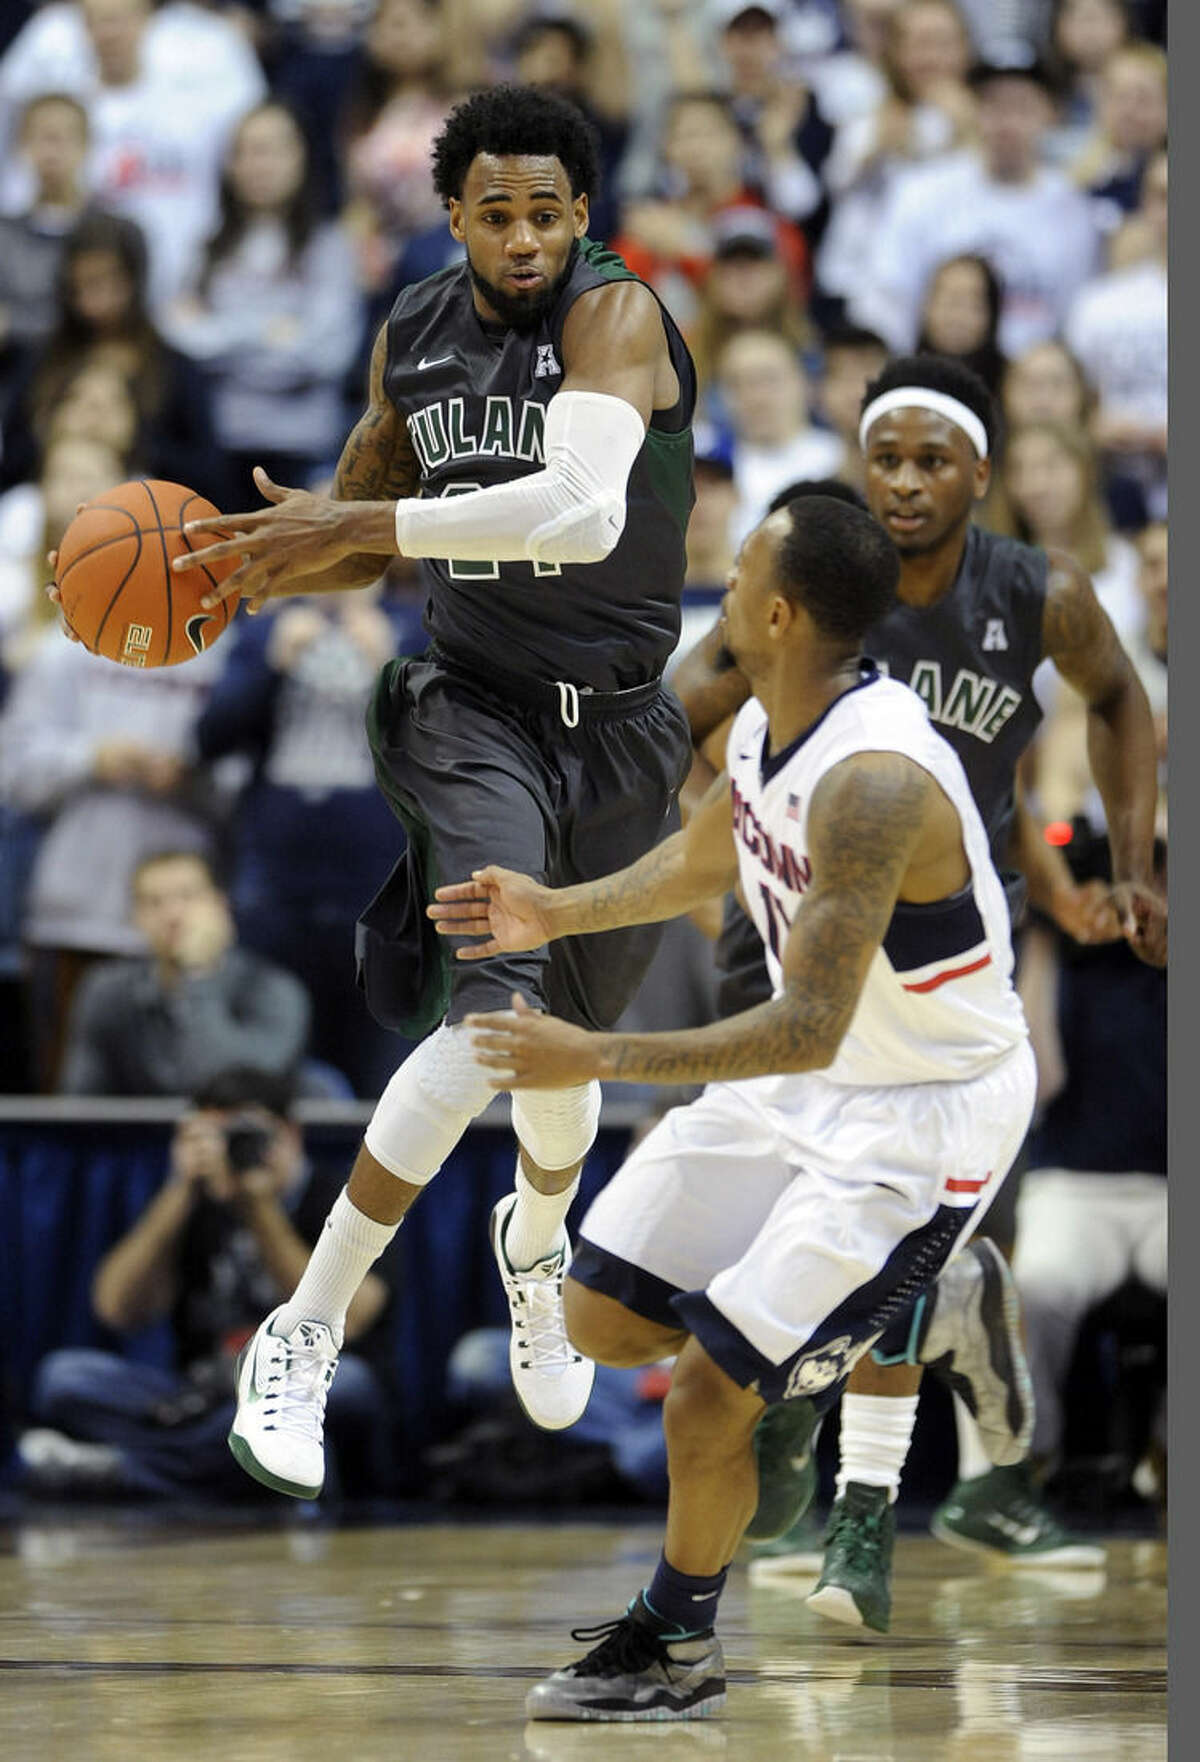 Connecticut's Ryan Boatright, right, guards Tulane's Jay Hook, left, during the first half of an NCAA college basketball game, Sunday, Feb. 22, 2015, in Storrs, Conn. (AP Photo/Fred Beckham)